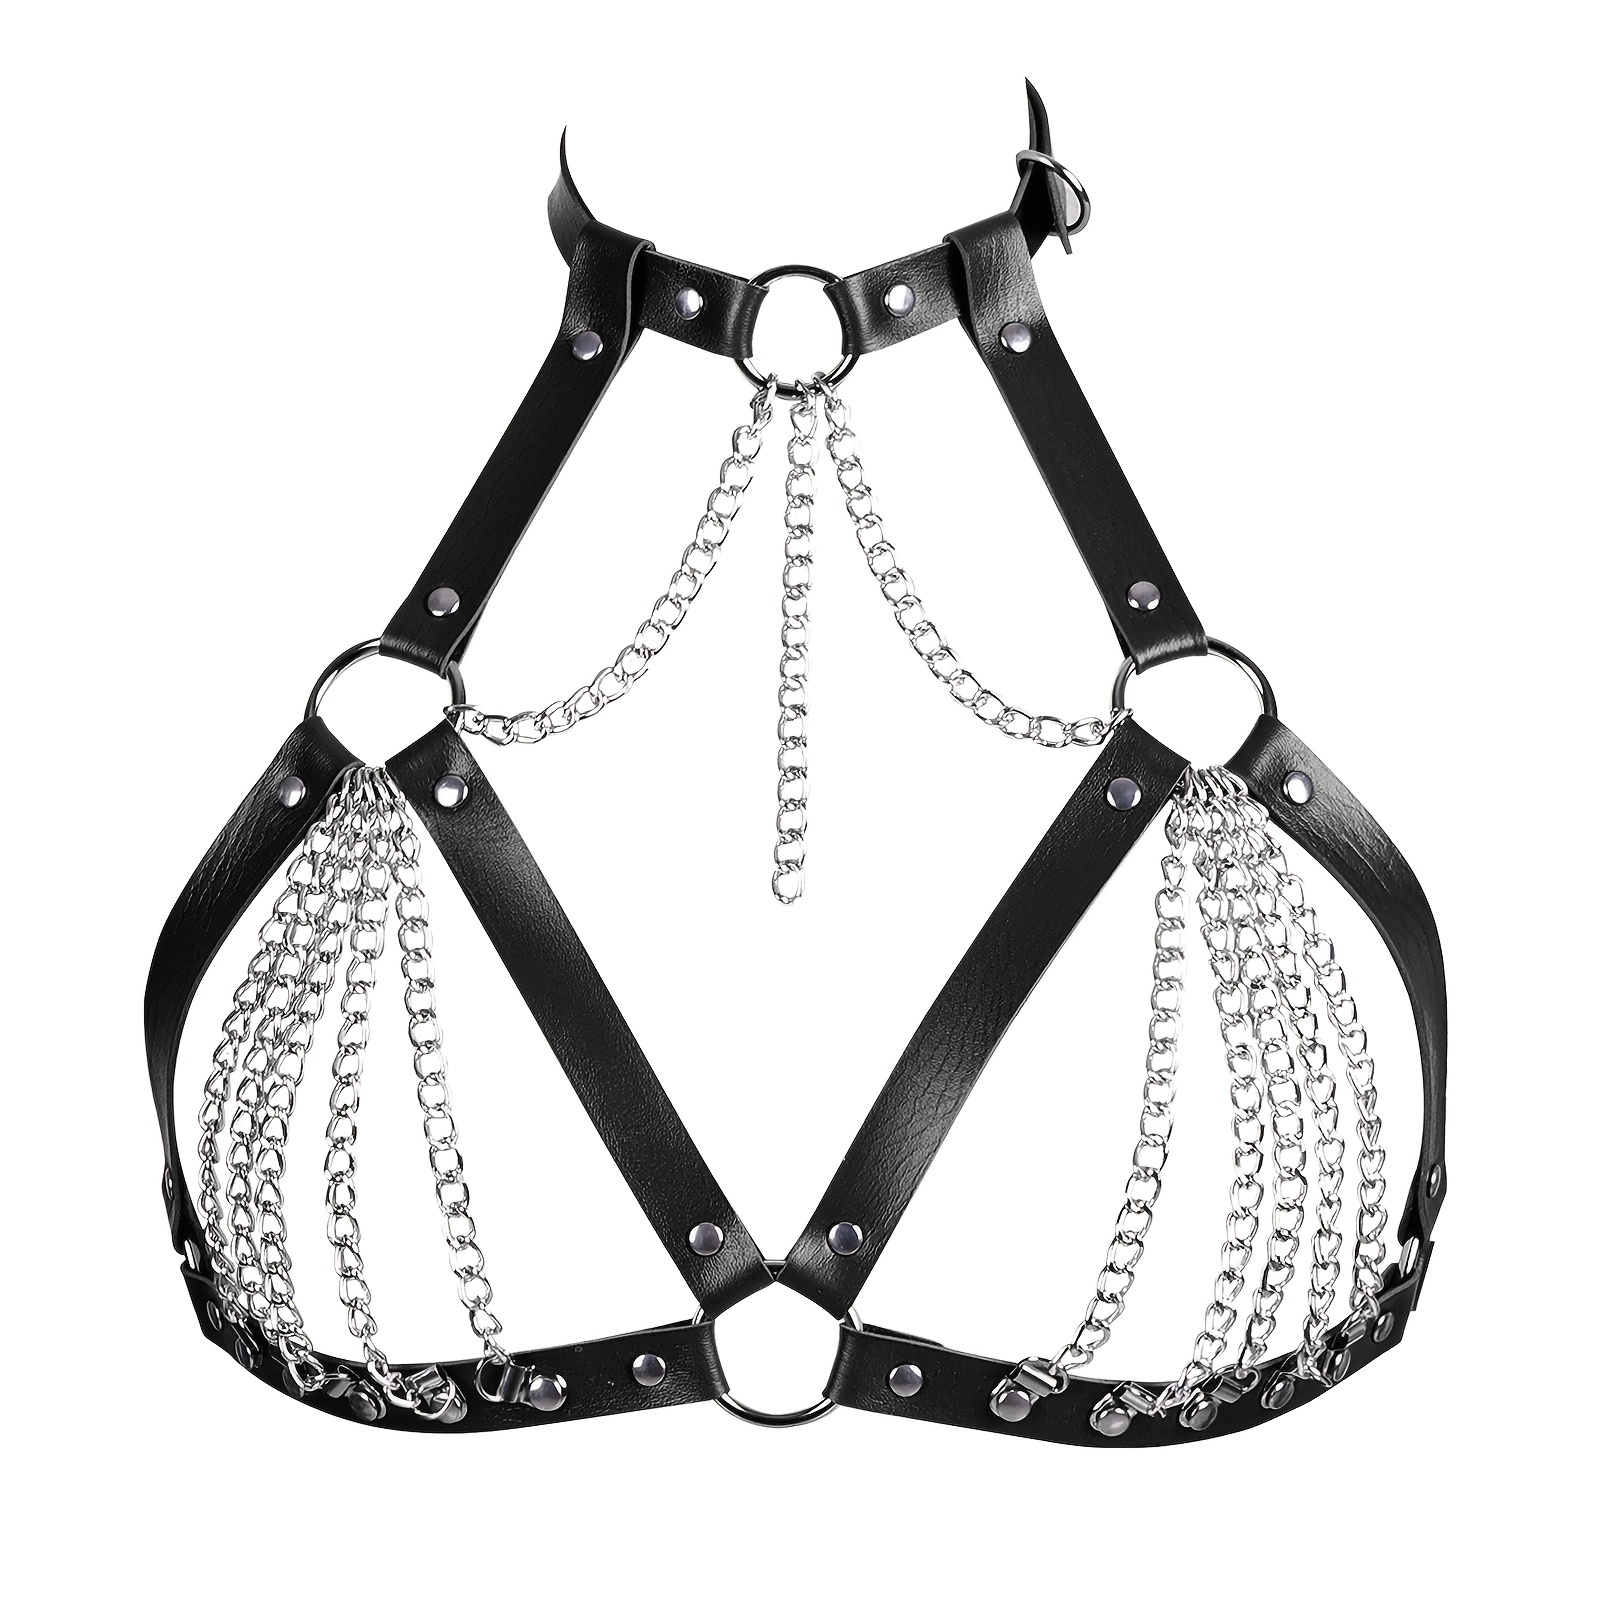 Women Goth Lingerie Chain Leather Harness Belt Cage Bra Strappy Body  Bustiers